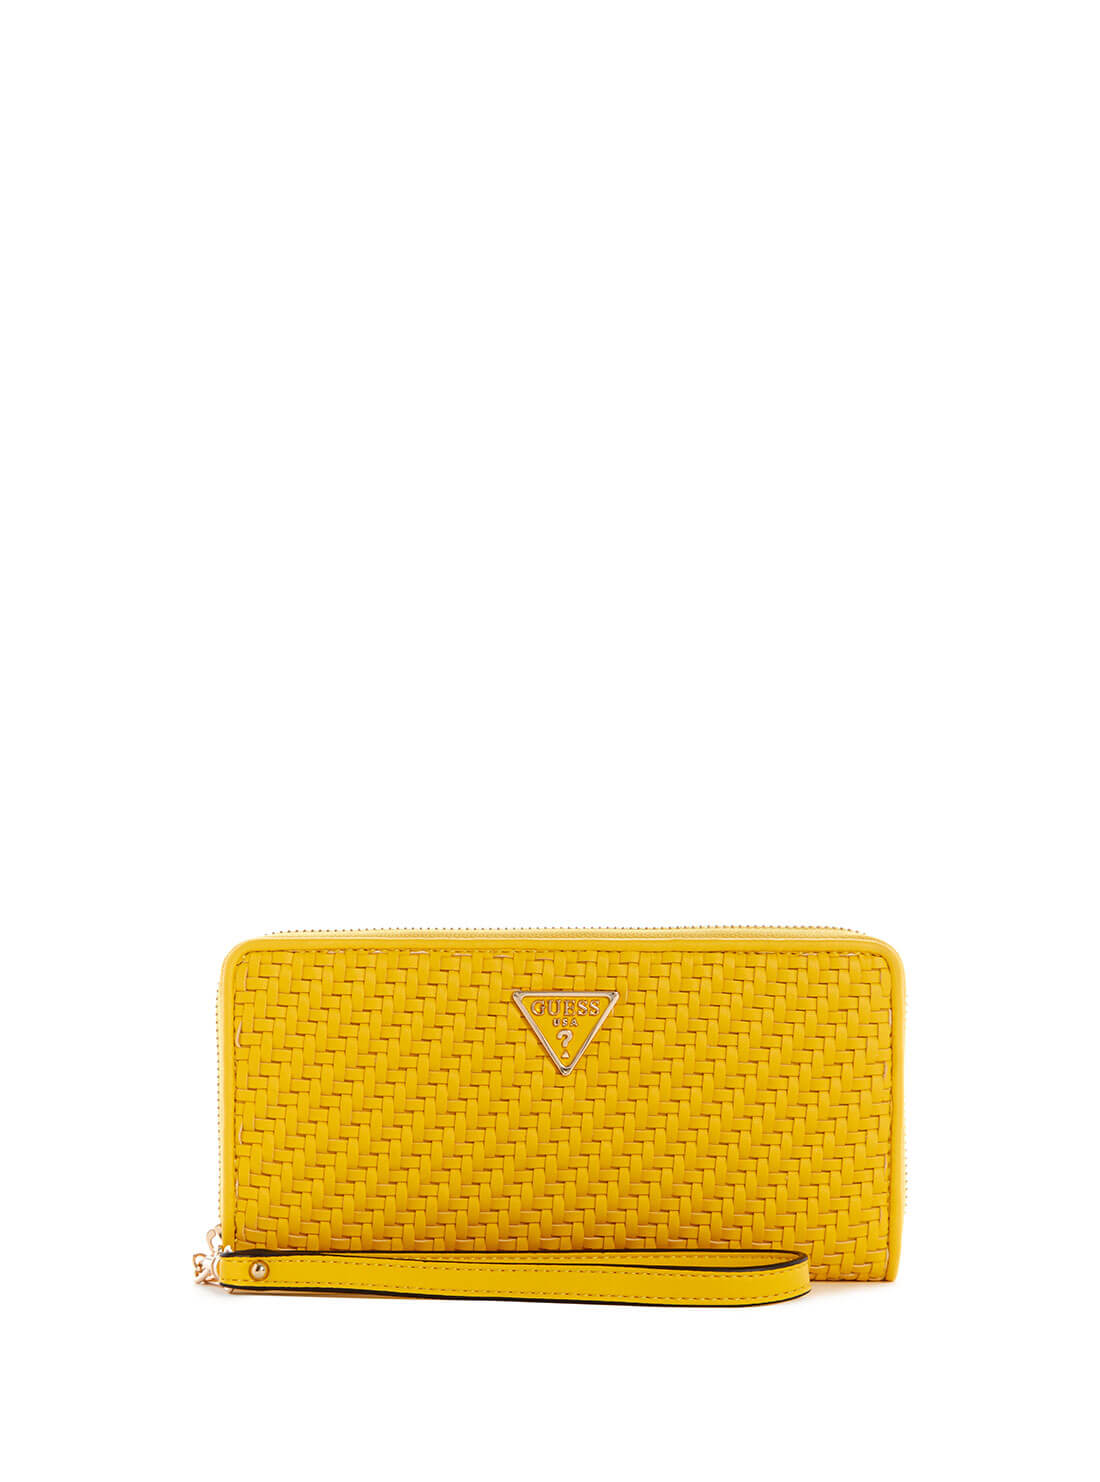 GUESS Womens Lemon Yellow Woven Hassie Large Wallet VG839746 Front View